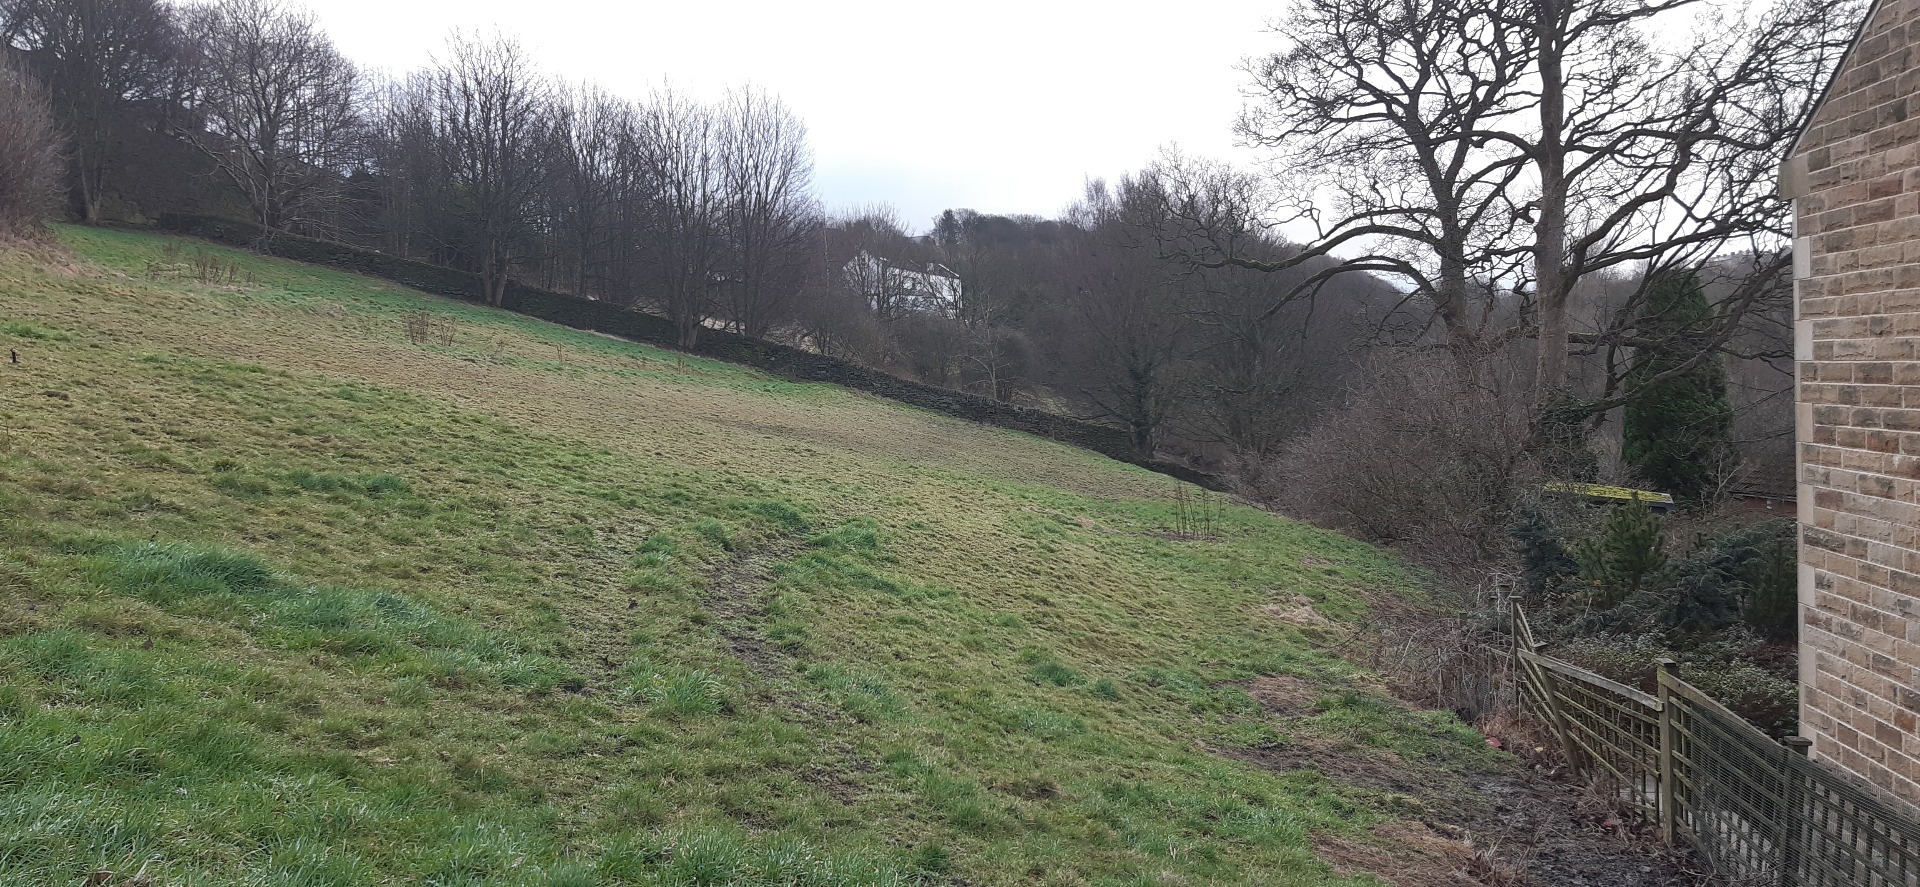 Photo showing steepness of slope in field.